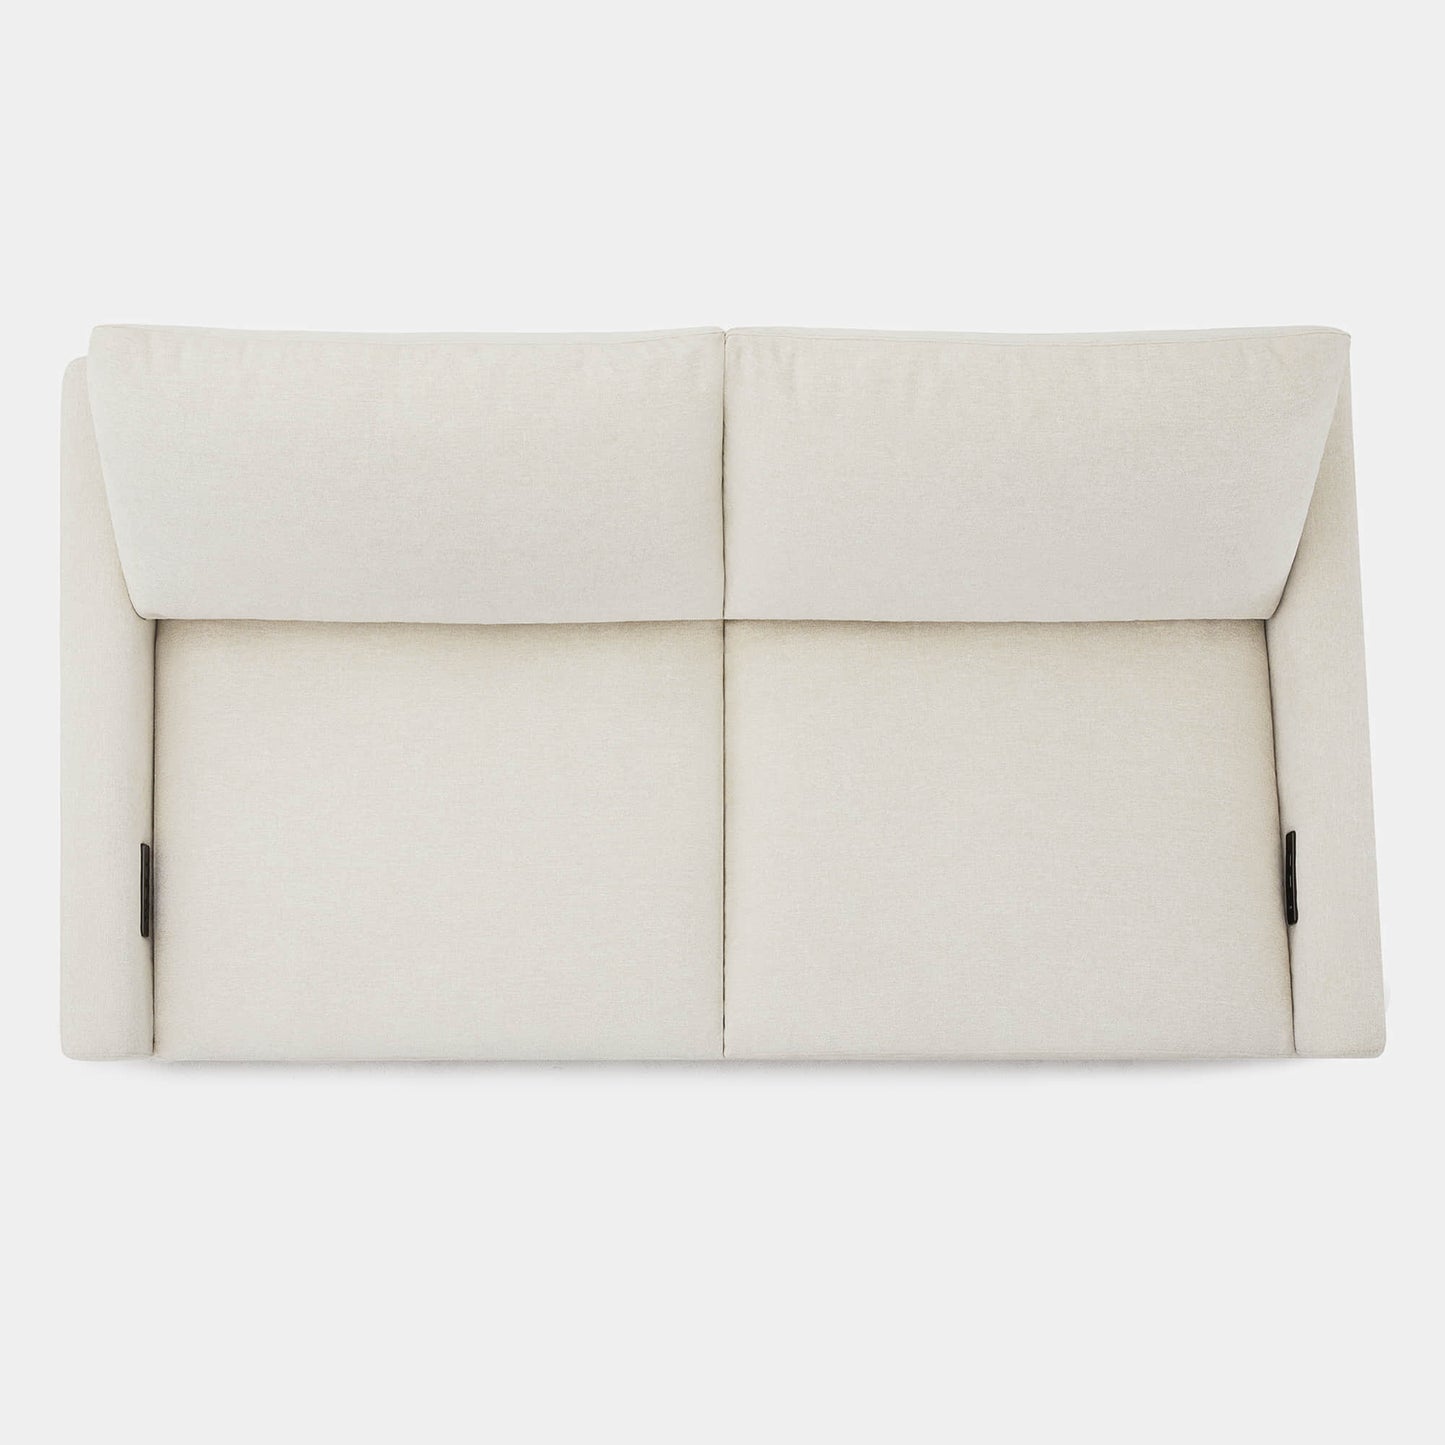 2 seater couch